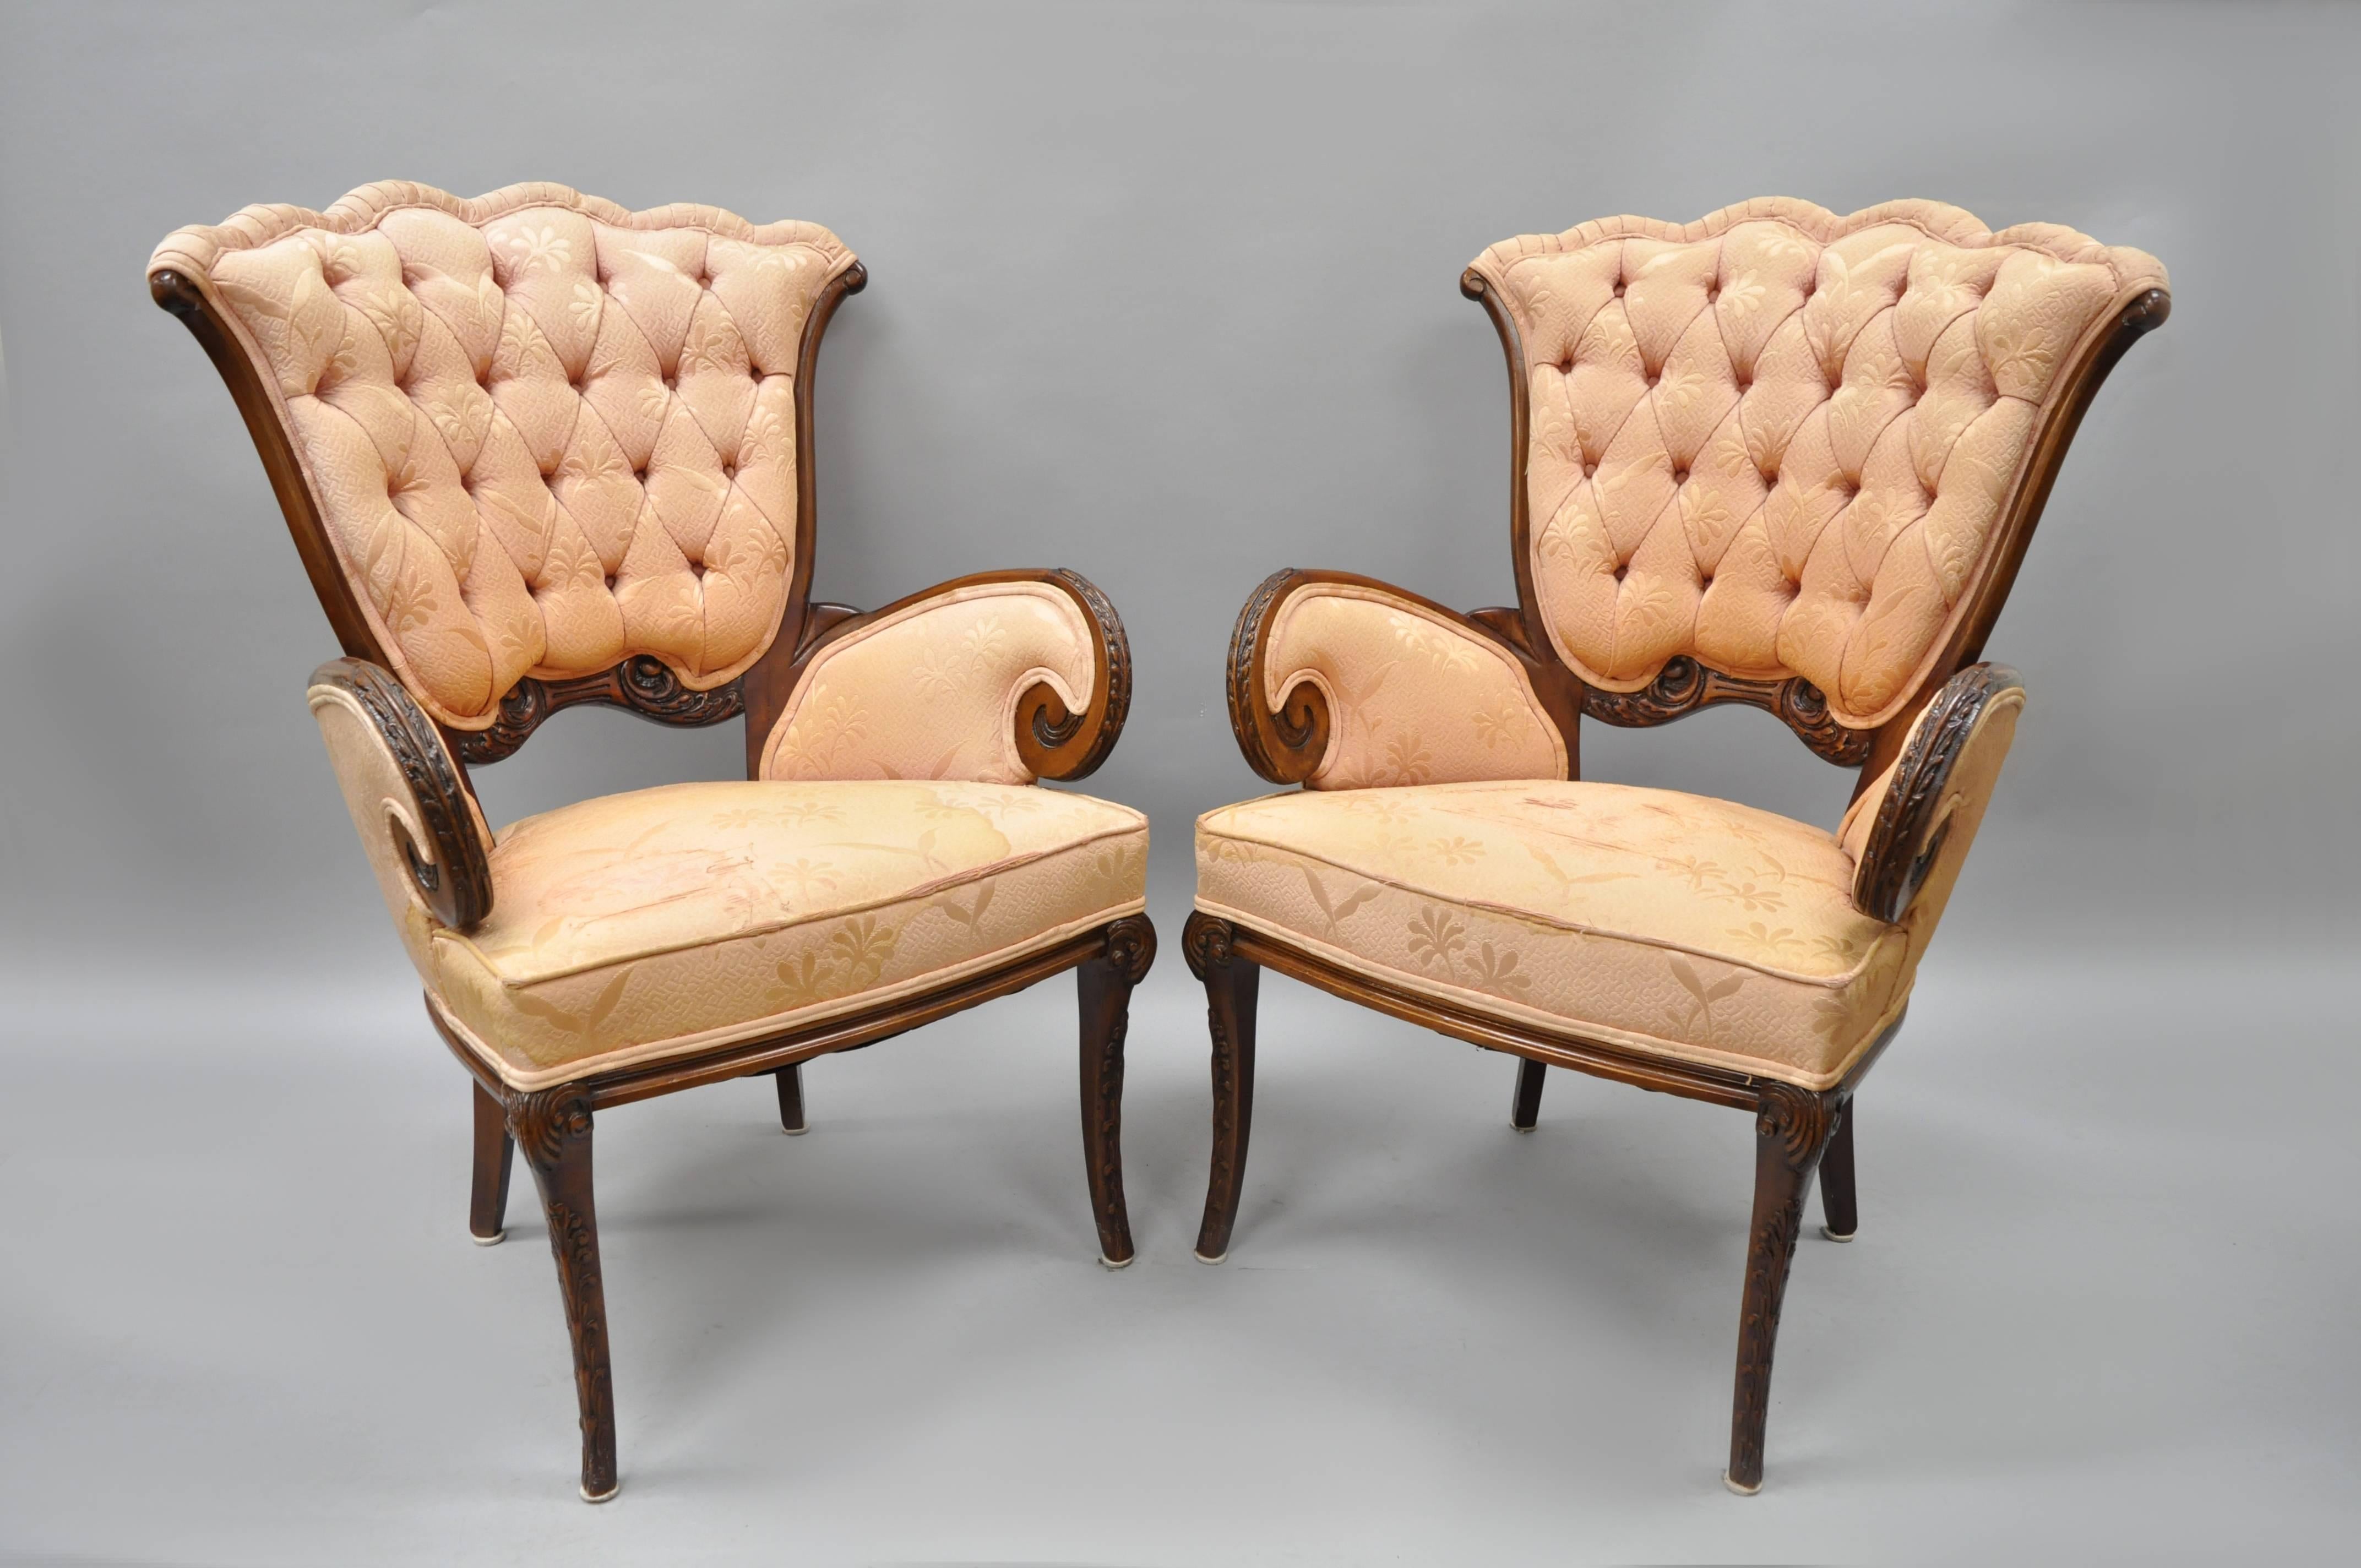 Pair of antique mahogany Hollywood Regency tufted armchairs attributed to Grosfeld House in the Dorothy Draper style. Chairs feature solid carved mahogany wood frames, scrolling arms, tapered saber legs, tufted upholstery, and remarkable quality and